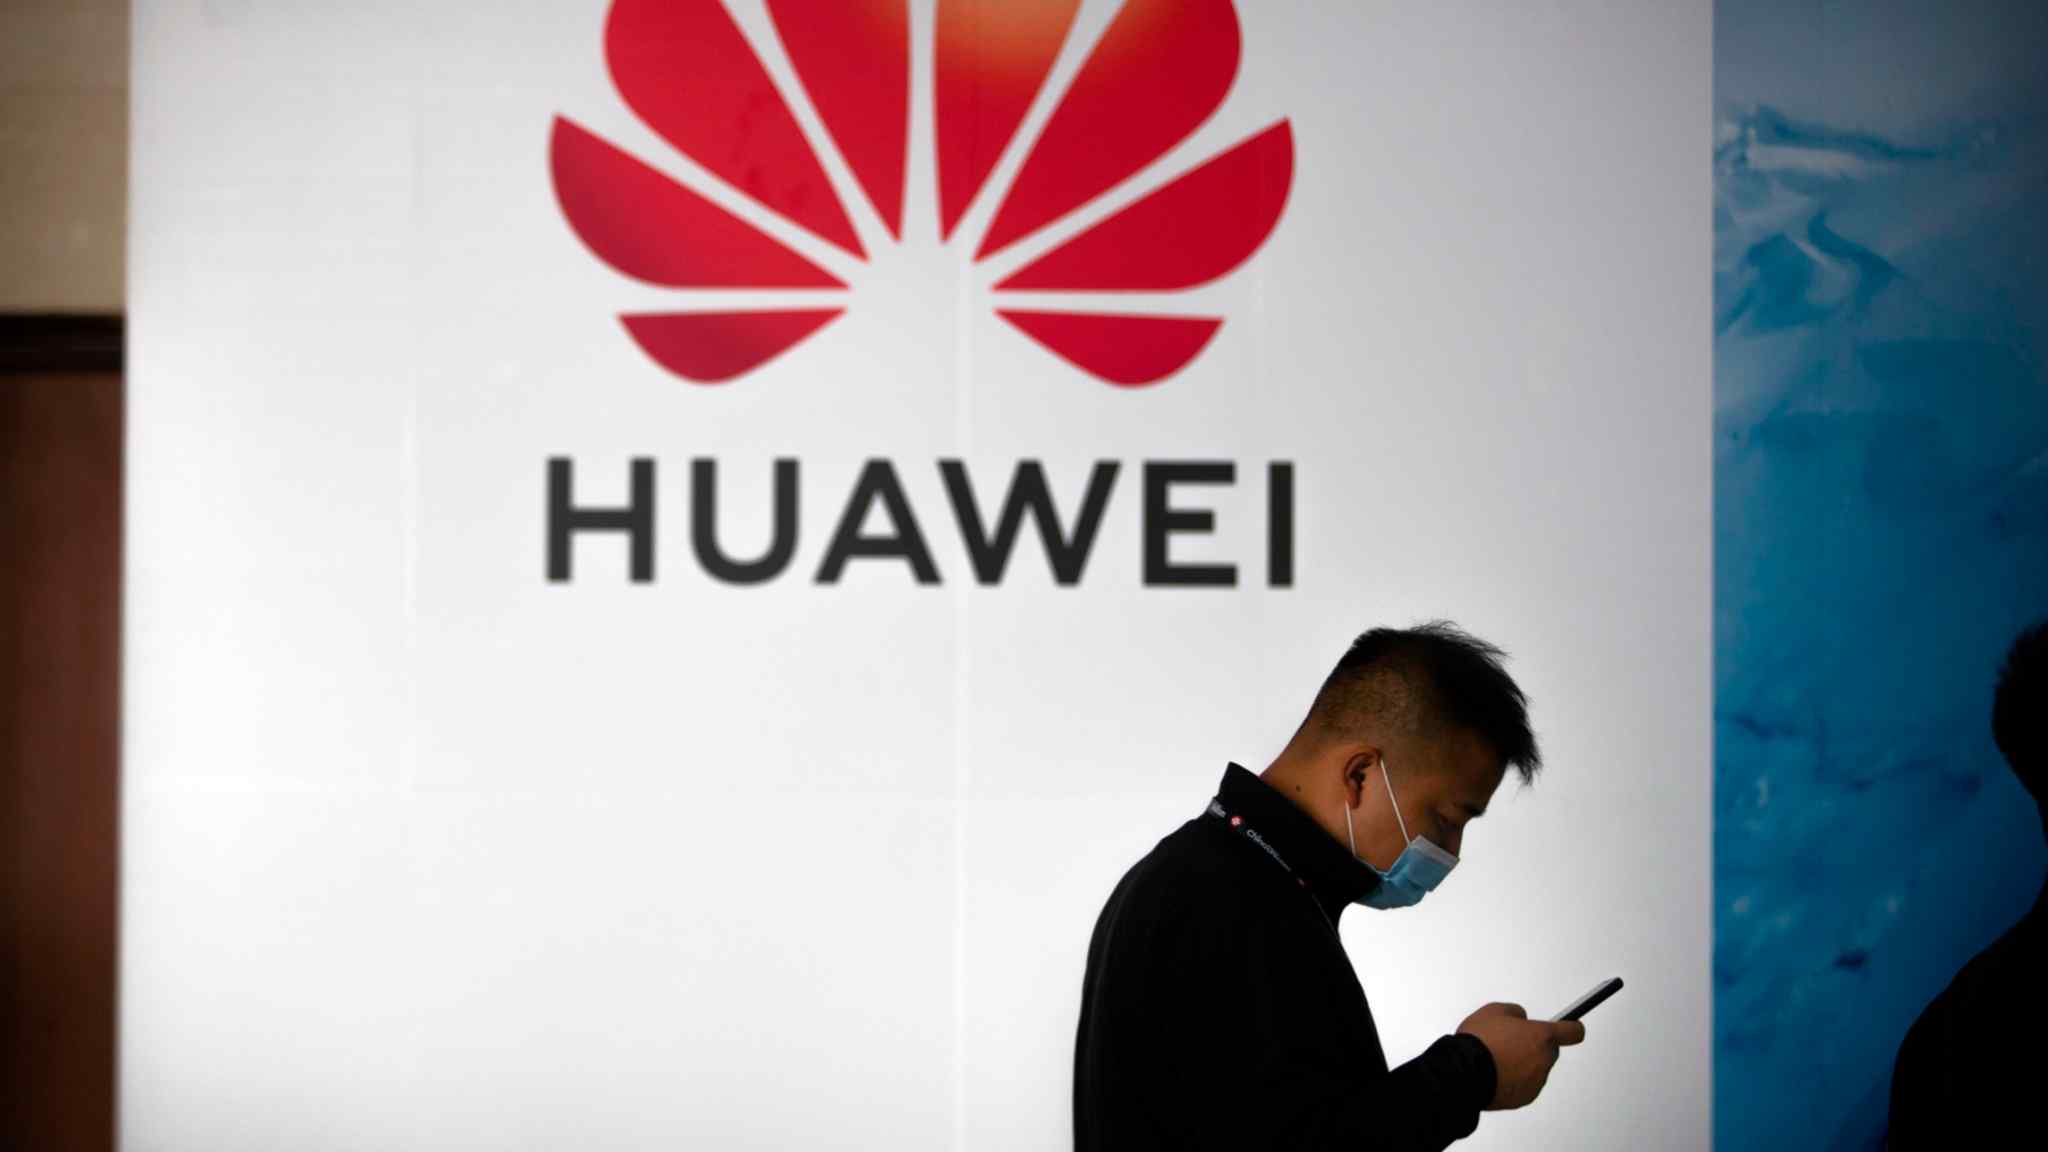 Huawei to relaunch 5G phone despite US sanctions